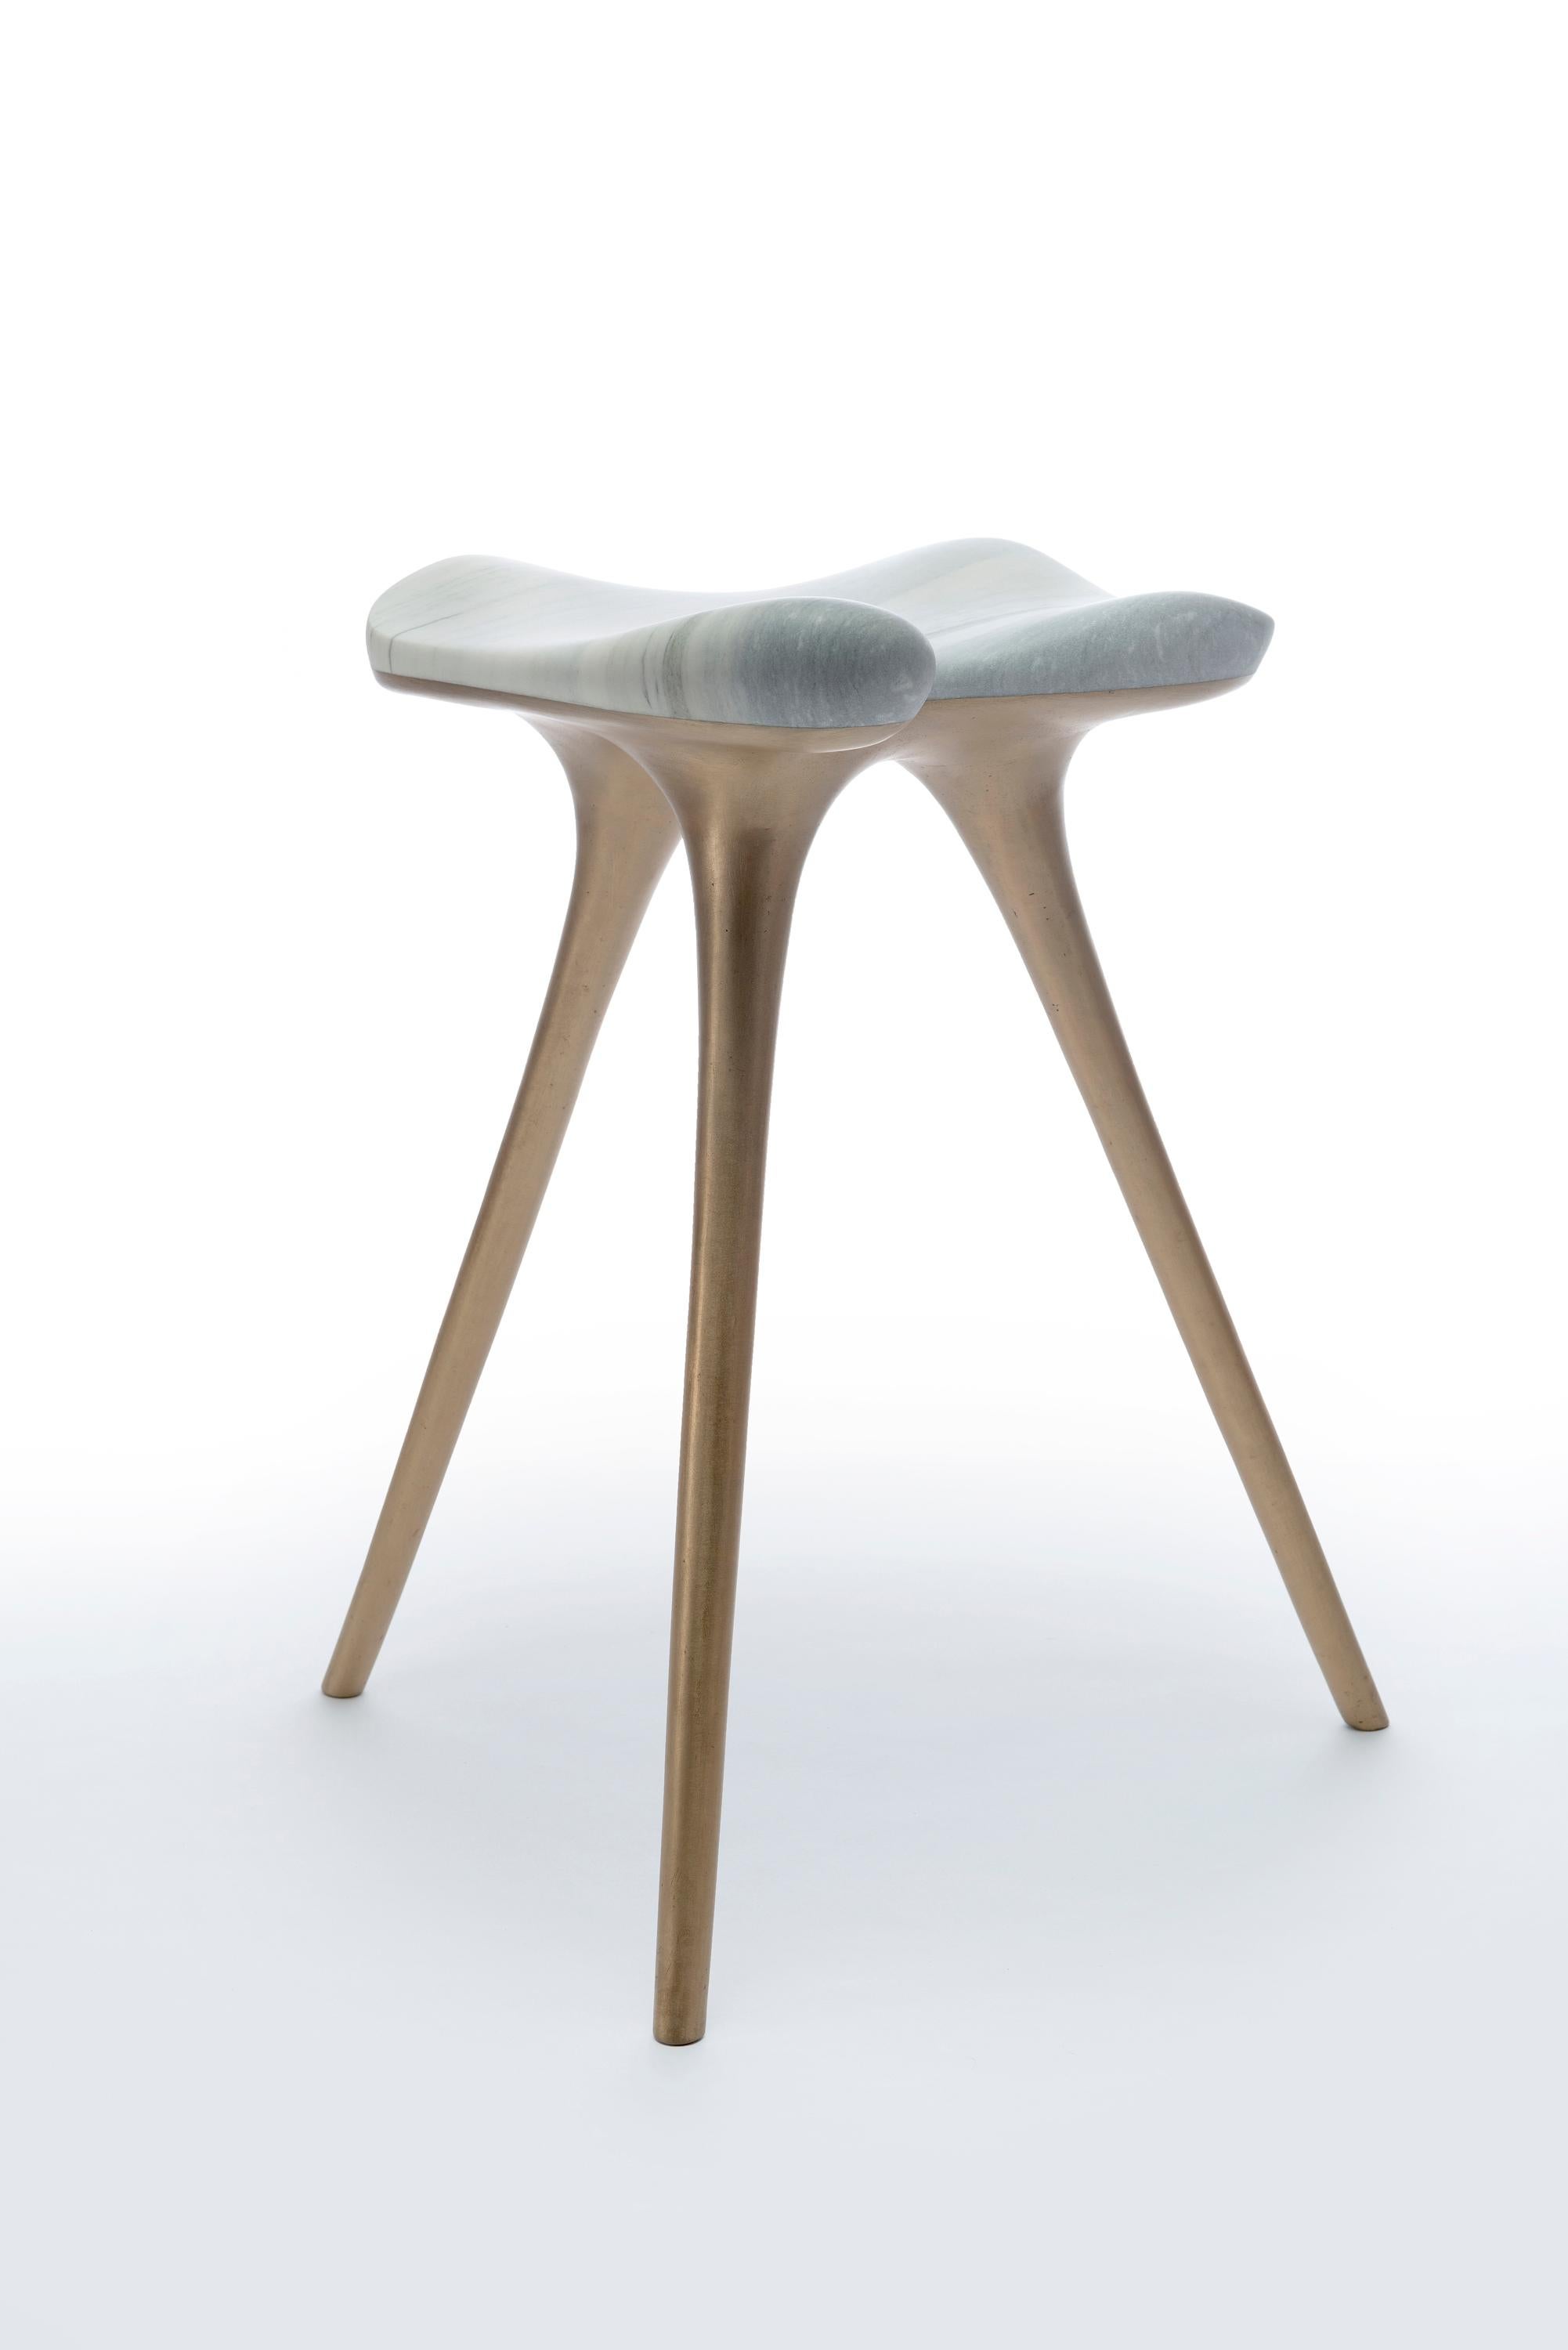 Nuvola Stool, 2018.
Hand-sculpted Vermont marble, cast bronze.
Measures: 22 x 20 x 25 in.
seat 15.5 in dia.
Ed. 1/12.